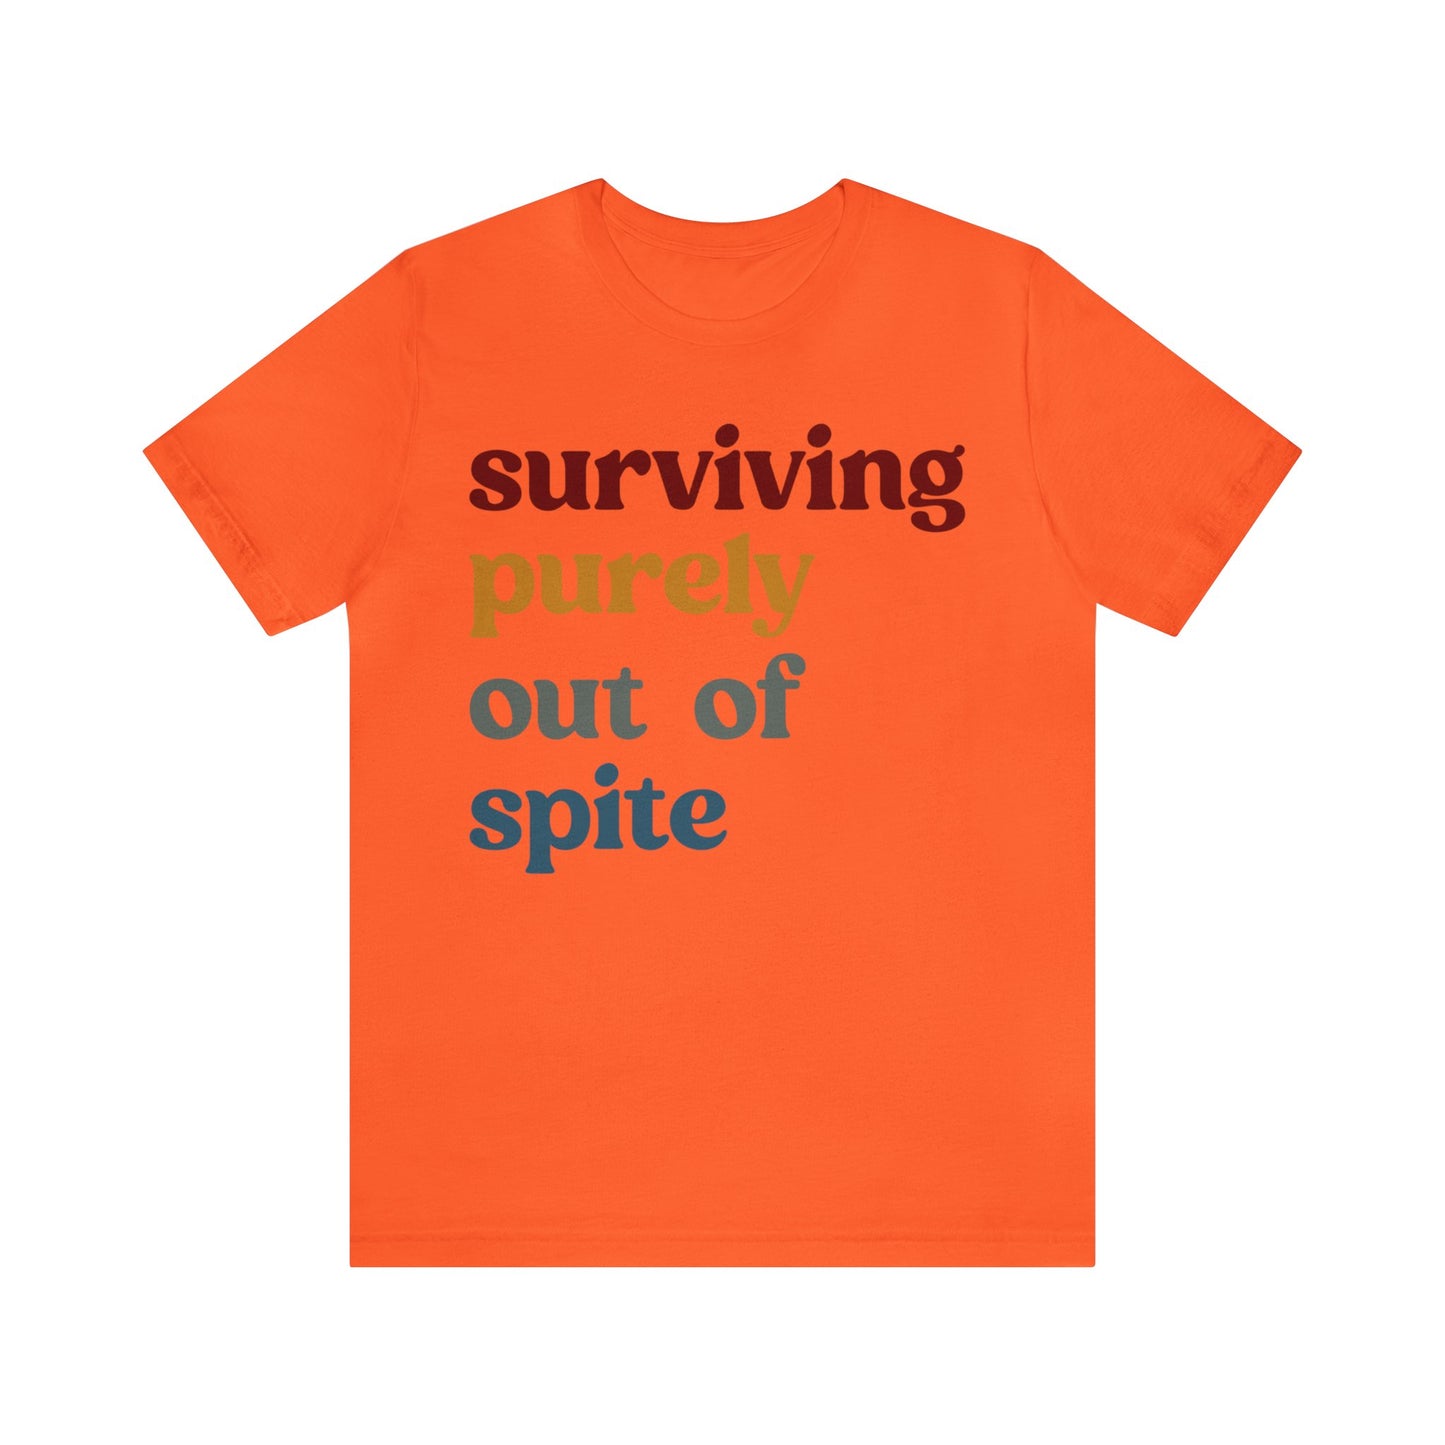 Surviving Purely Out of Spite Shirt, Mental Health, Strong Woman, Cancer Survivor, Survivor Shirt, Strong Empowered Women, Iron Lady, T1407